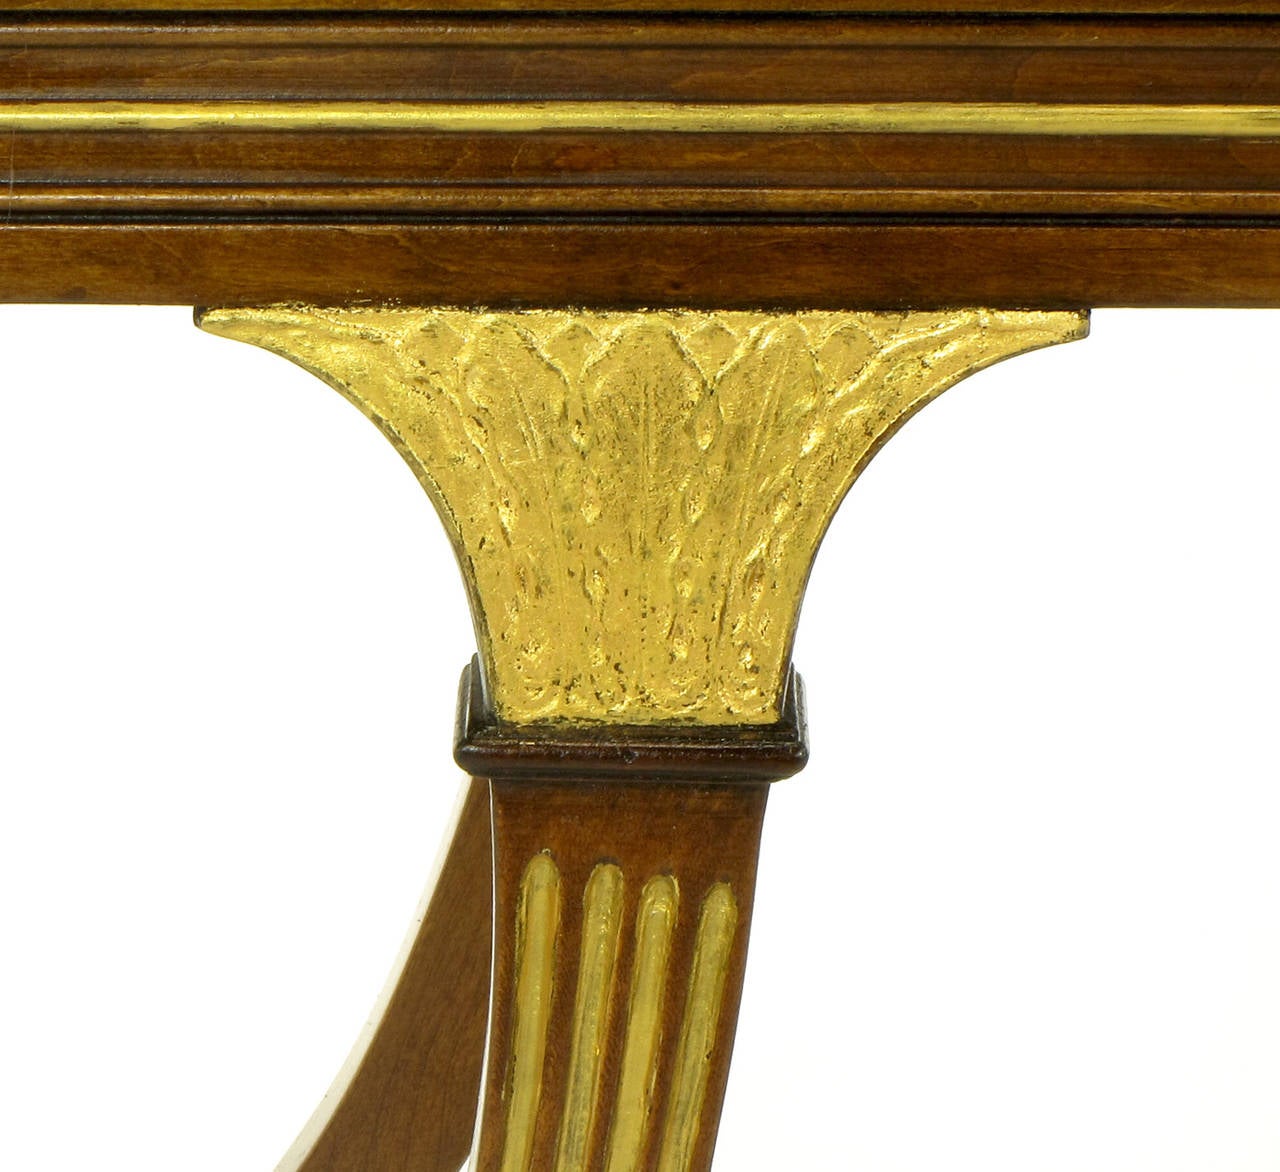 Giltwood Early 1900s Parcel-Gilt and Walnut Empire Coffee Table with Gold Mirror Top For Sale